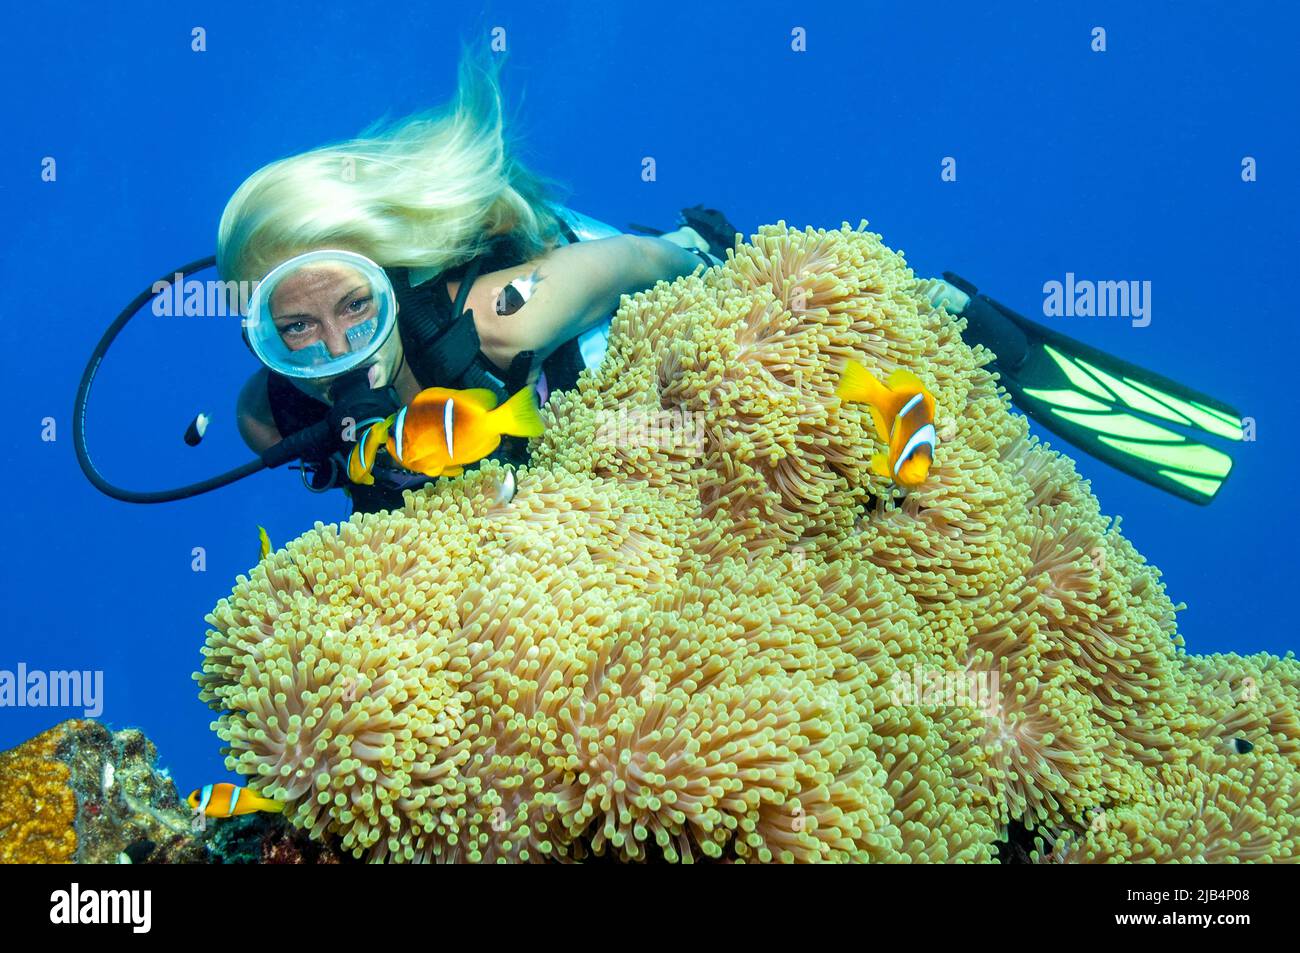 Diver looking at red sea clownfishes (Amphiprion bicinctus) and giant carpet anemone (Stichodactyla gigantea), Red Sea, Hurghada, Egypt Stock Photo